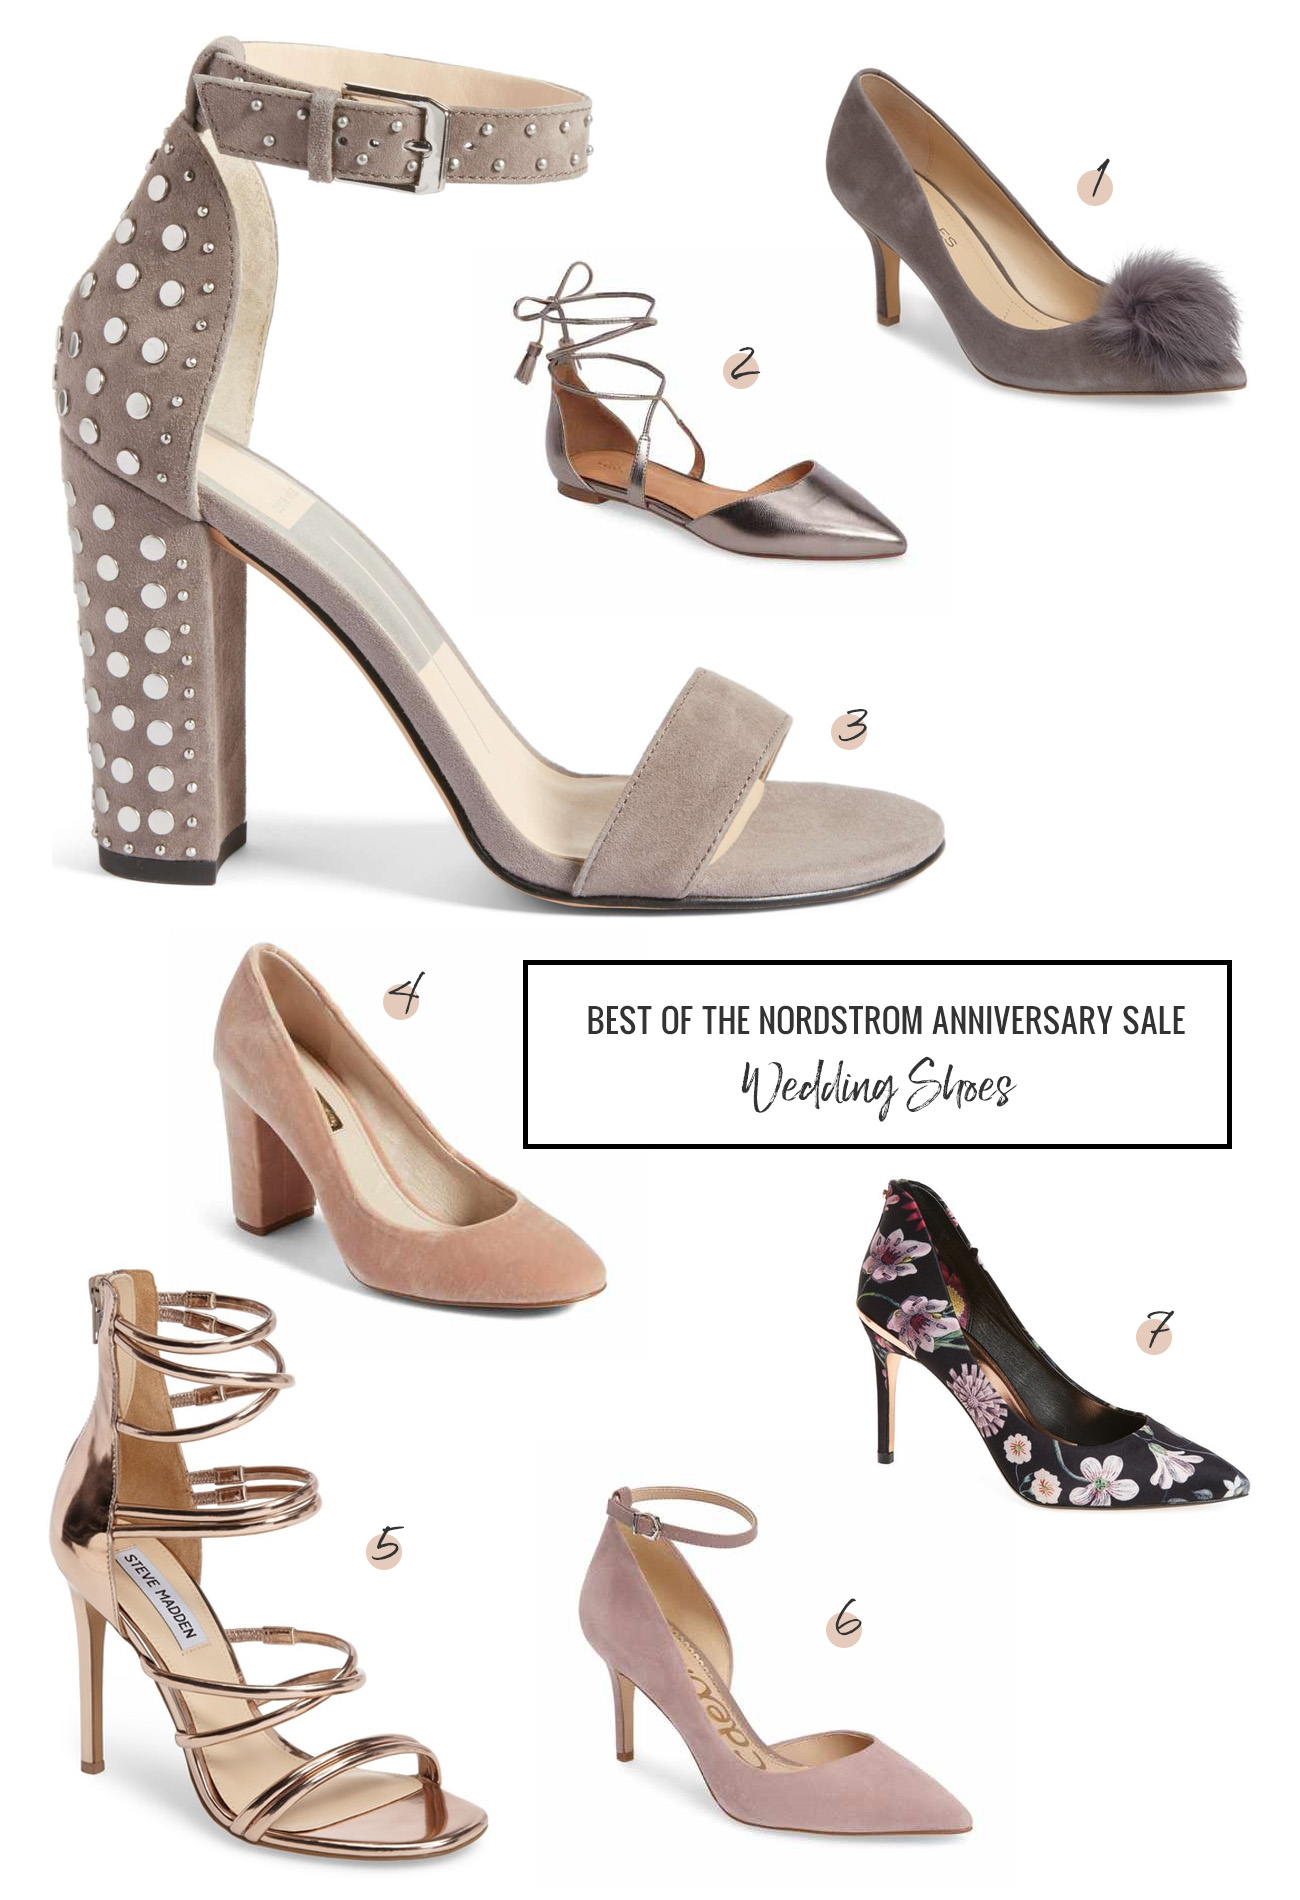 Nordstrom Anniversary Sale – Our Shoe Picks!